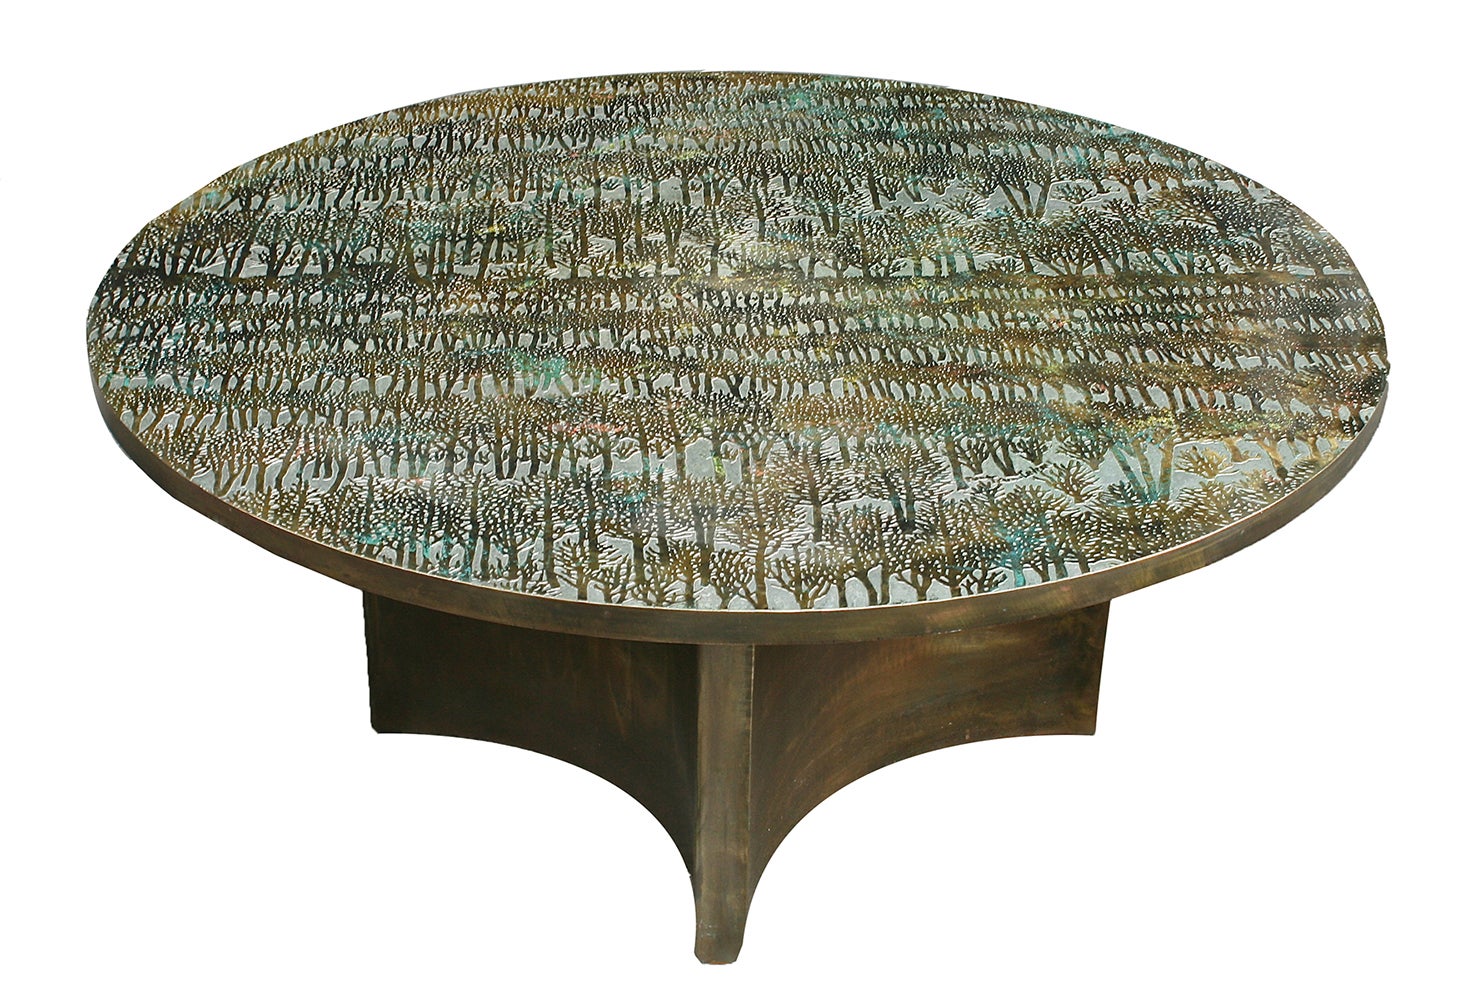 Eternal Forest Round Low Table by Phillip and Kelvin LaVerne, USA, c. 1970s